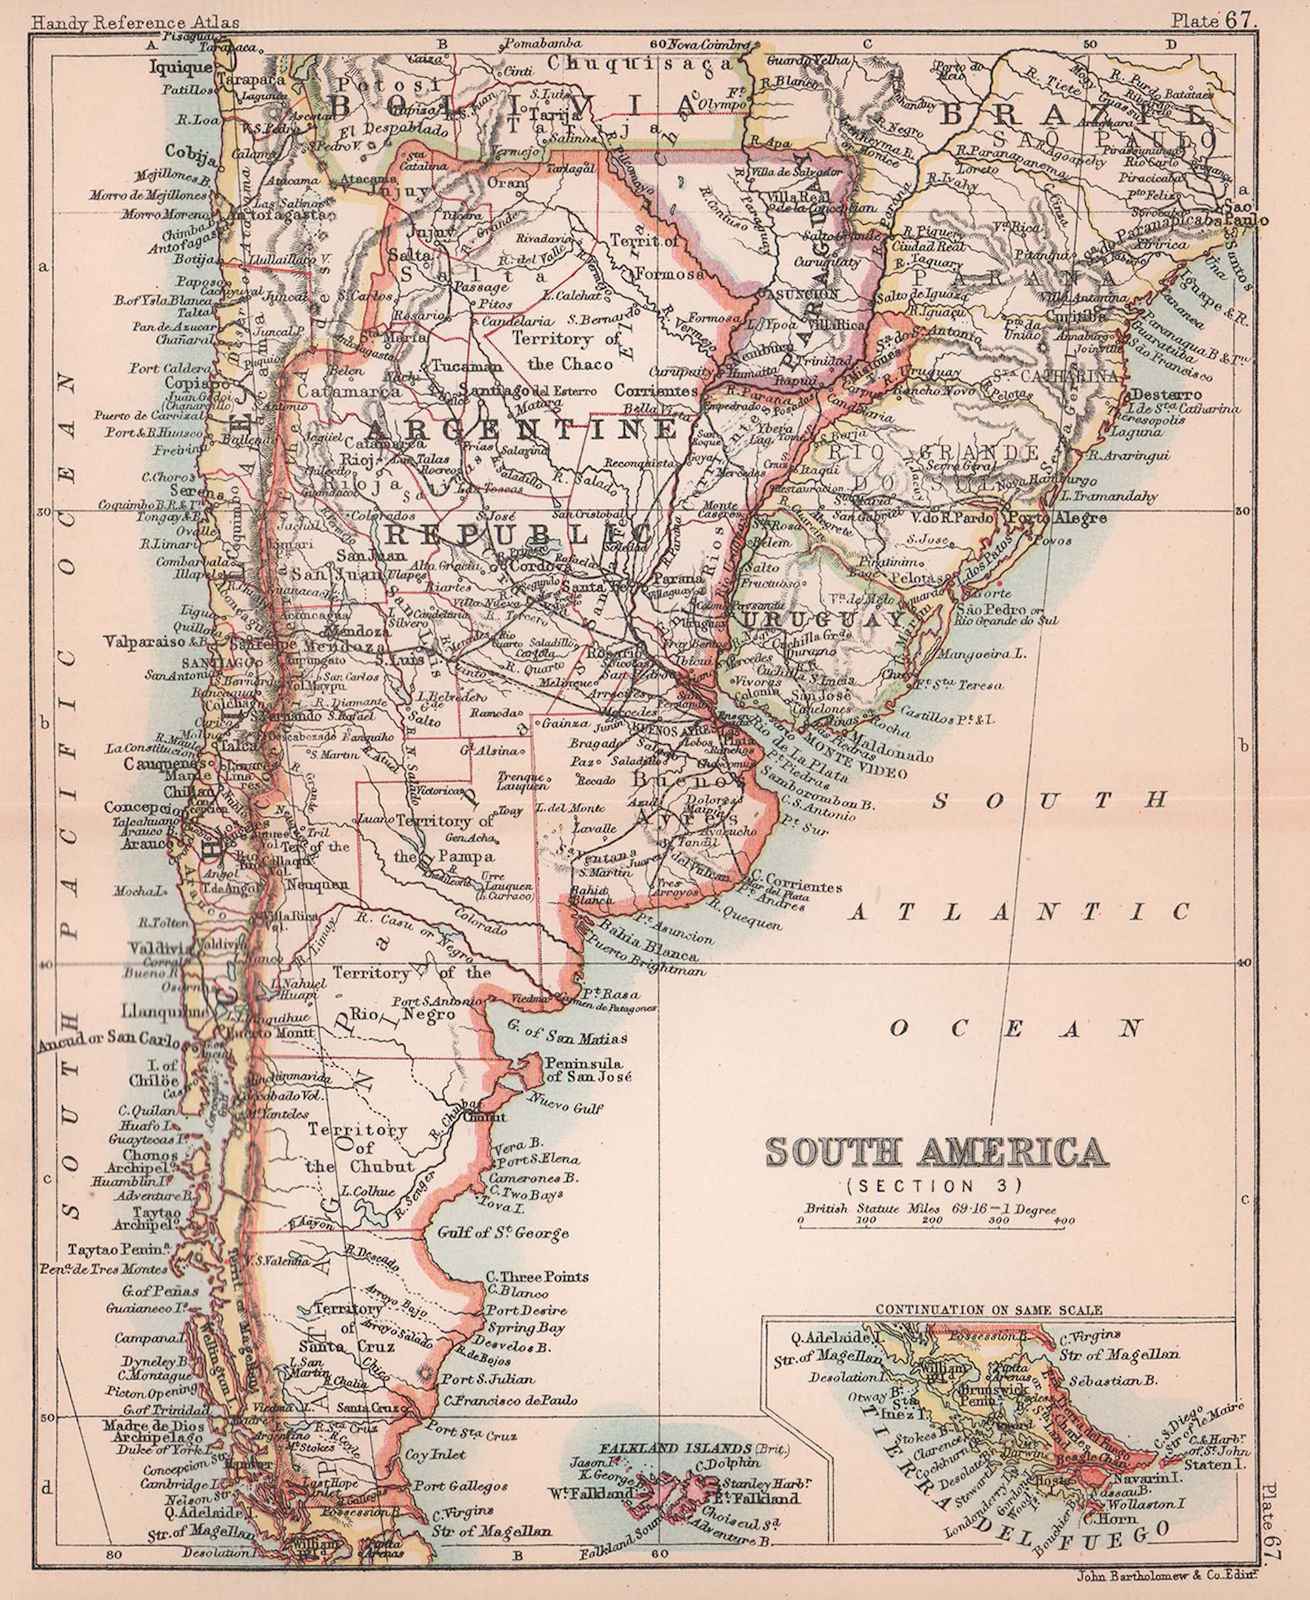 Associate Product South America #3. Argentina Chile Patagonia Paraguay. BARTHOLOMEW 1893 old map